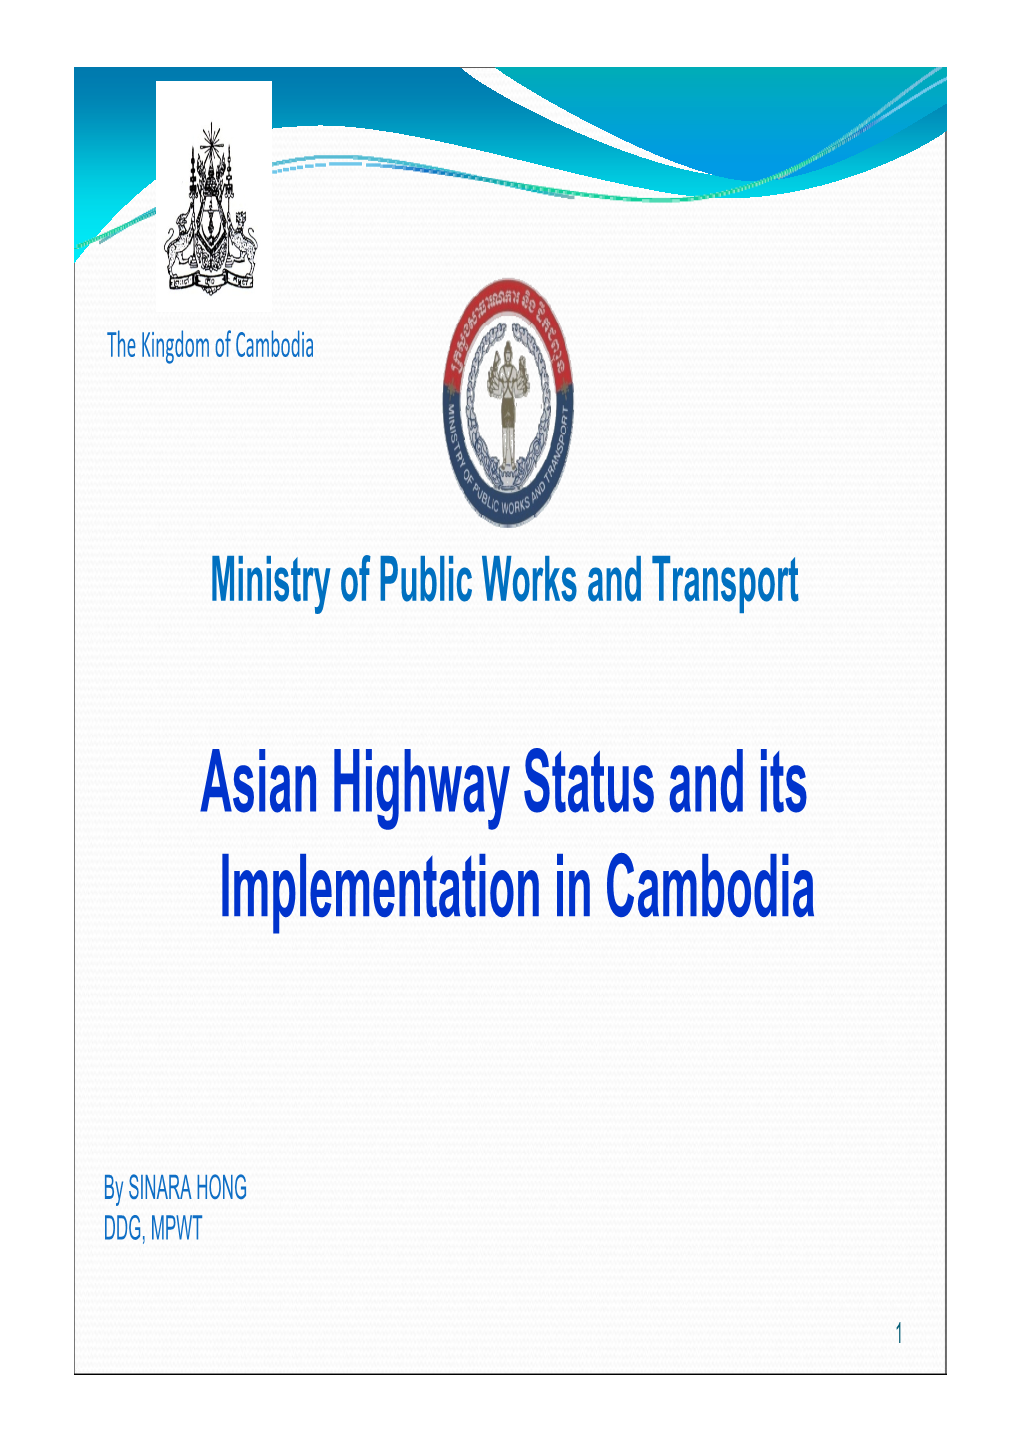 Asian Highway Status and Its Implementation in Cambodia